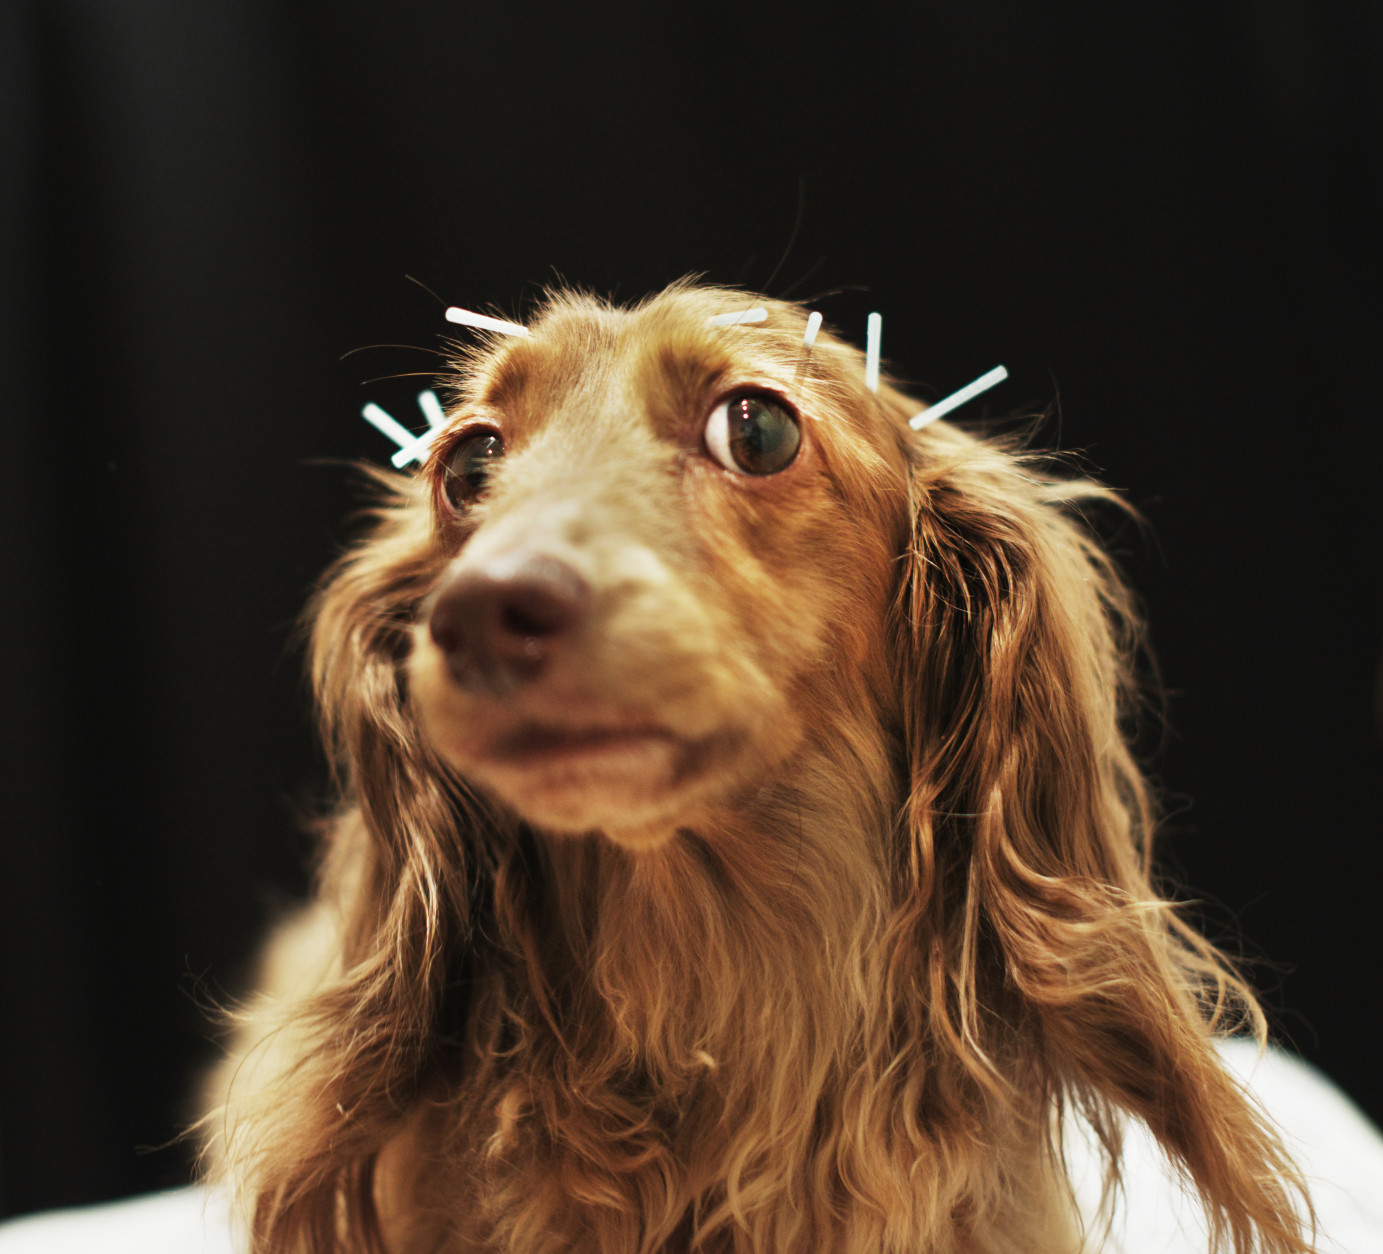 Chocolate, a miniature dachshund receives acupuncture therapy to help with lumbar disk herniation, at the Marina Street Okada animal hospital on April 12, 2013 in Tokyo Japan.  (Photo by Adam Pretty/Getty Images)